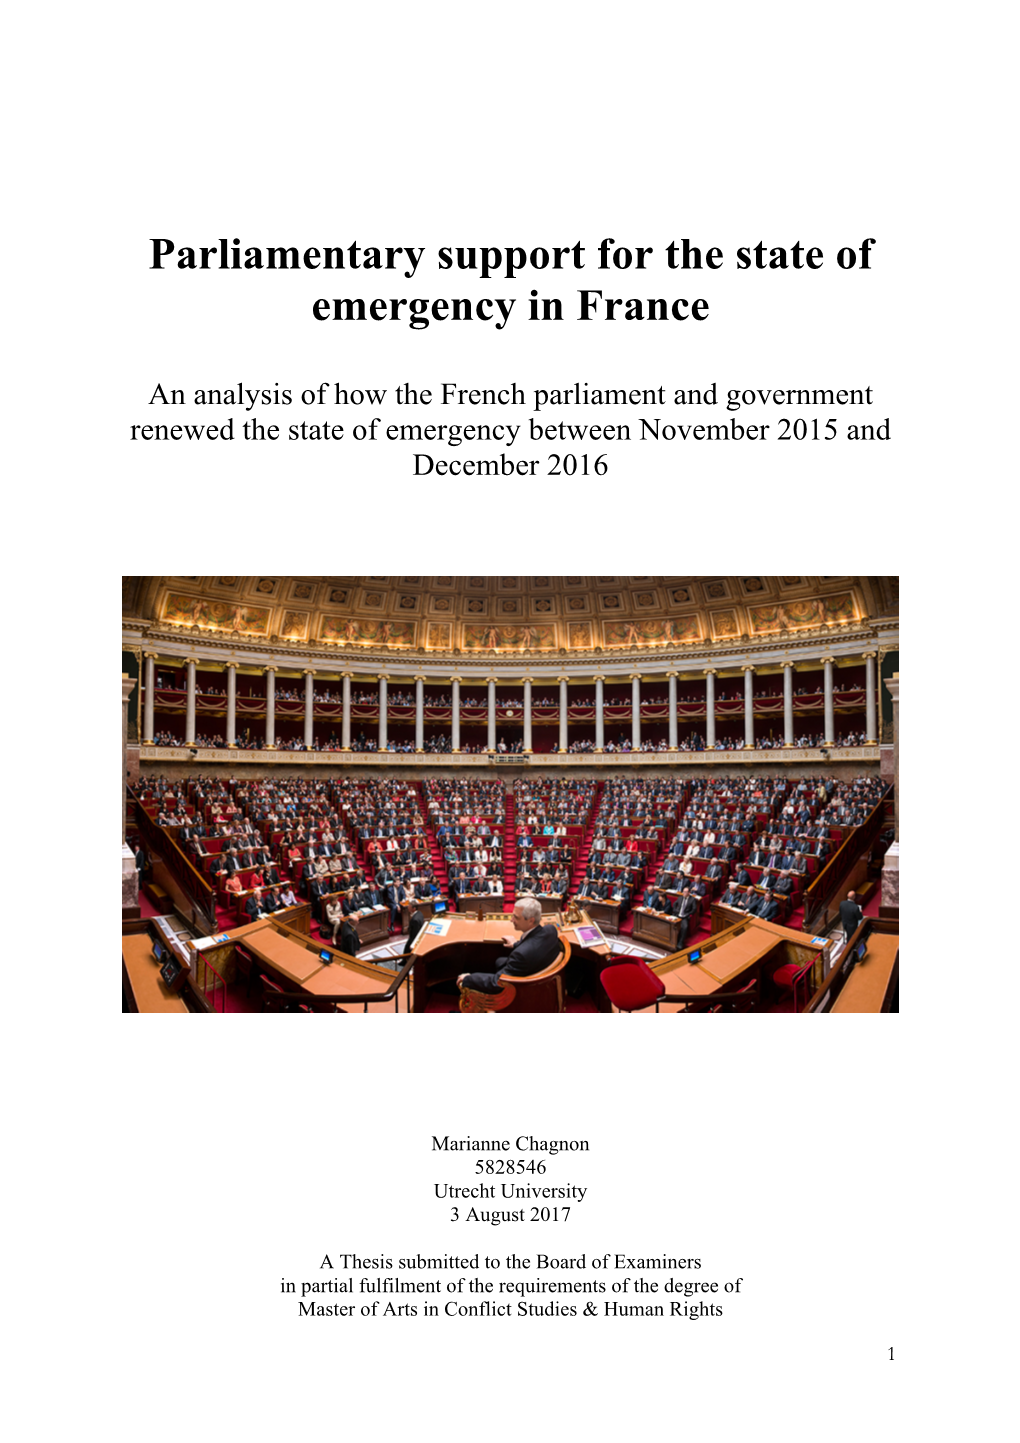 Parliamentary Support for the State of Emergency in France